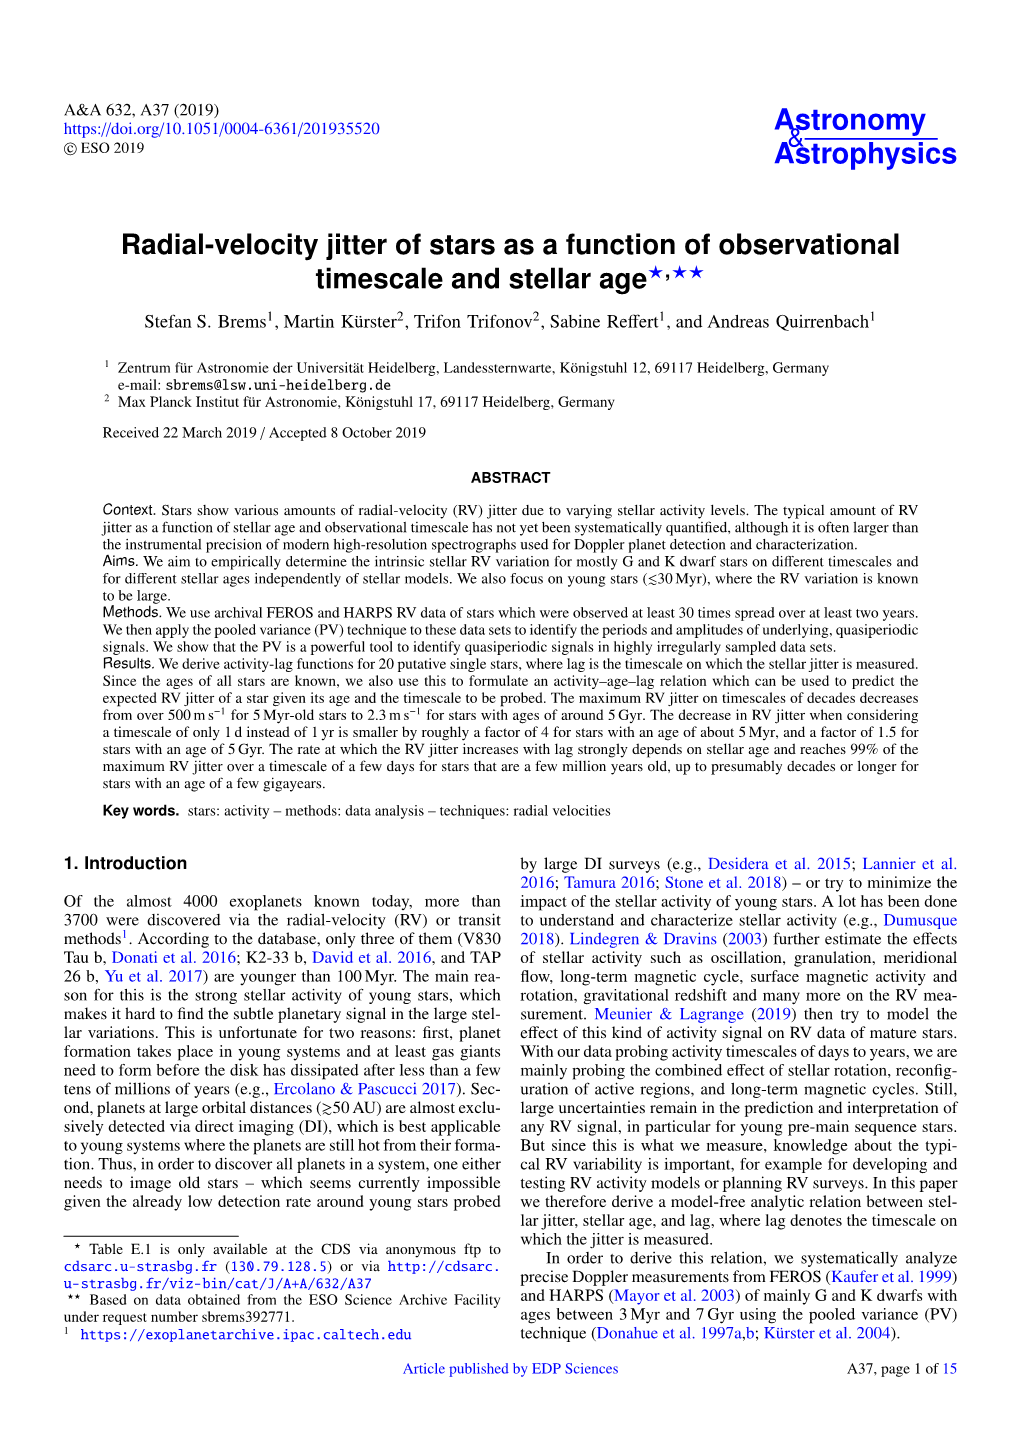 Radial-Velocity Jitter of Stars As a Function of Observational Timescale and Stellar Age?,?? Stefan S